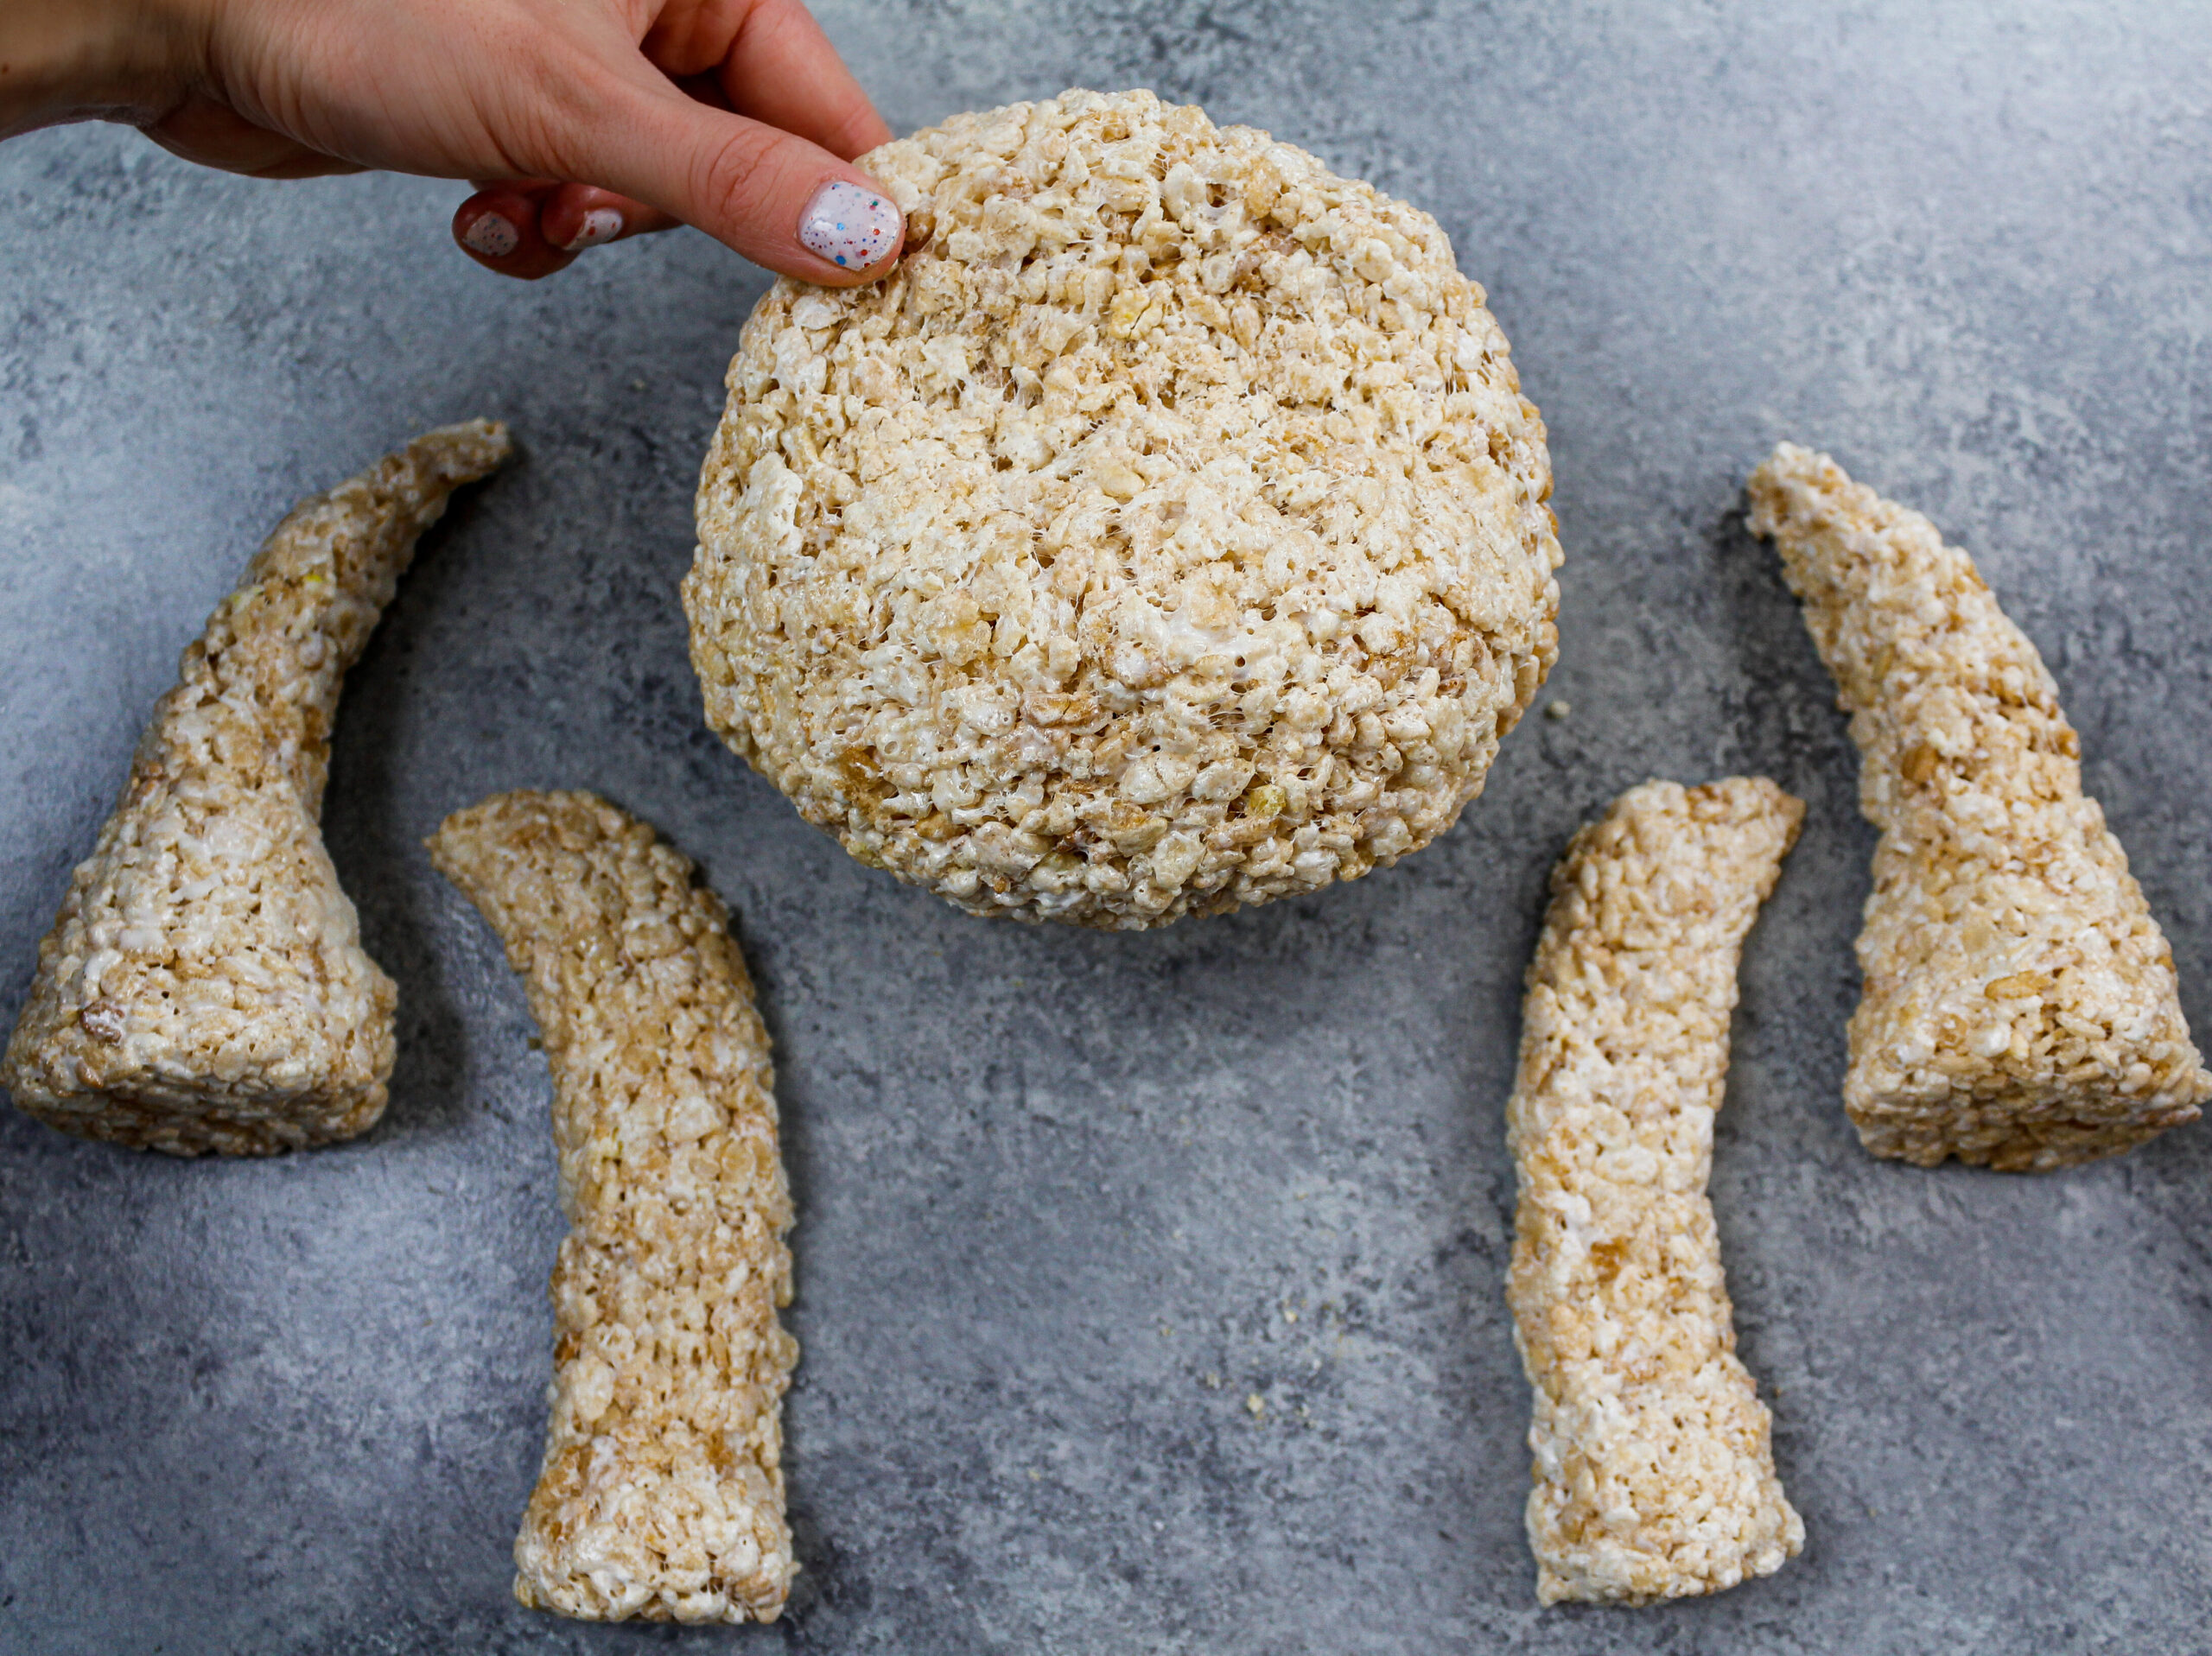 image of cake decorating rice krispies that have been shaped into legs and a head to make a giraffe cake